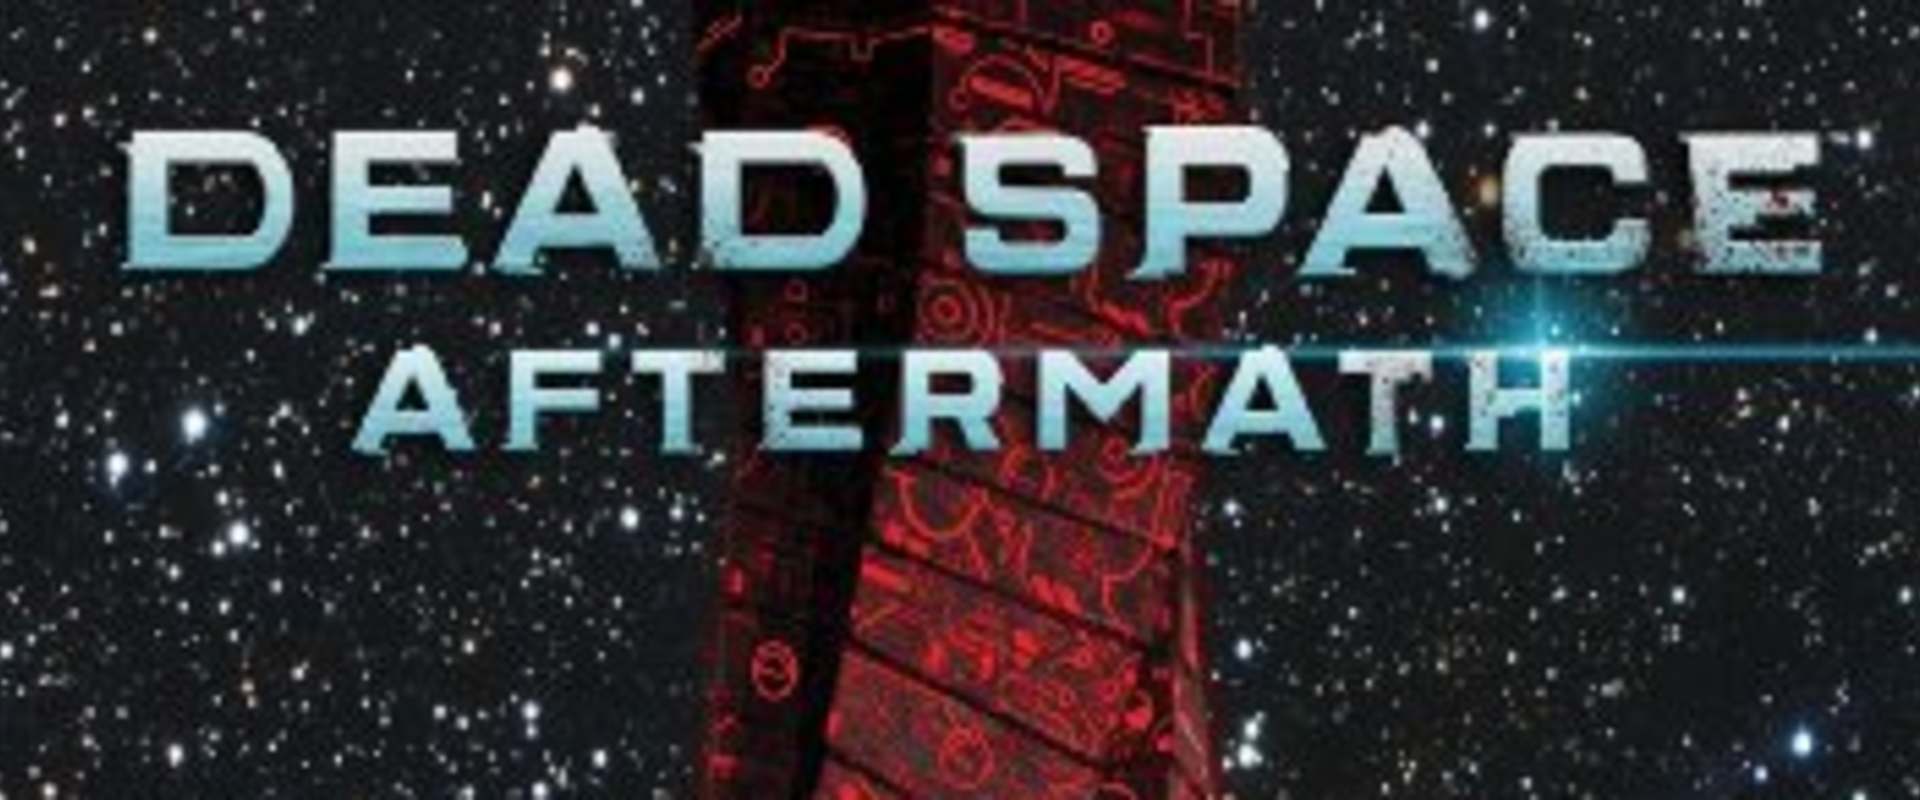 dead space aftermath full movie